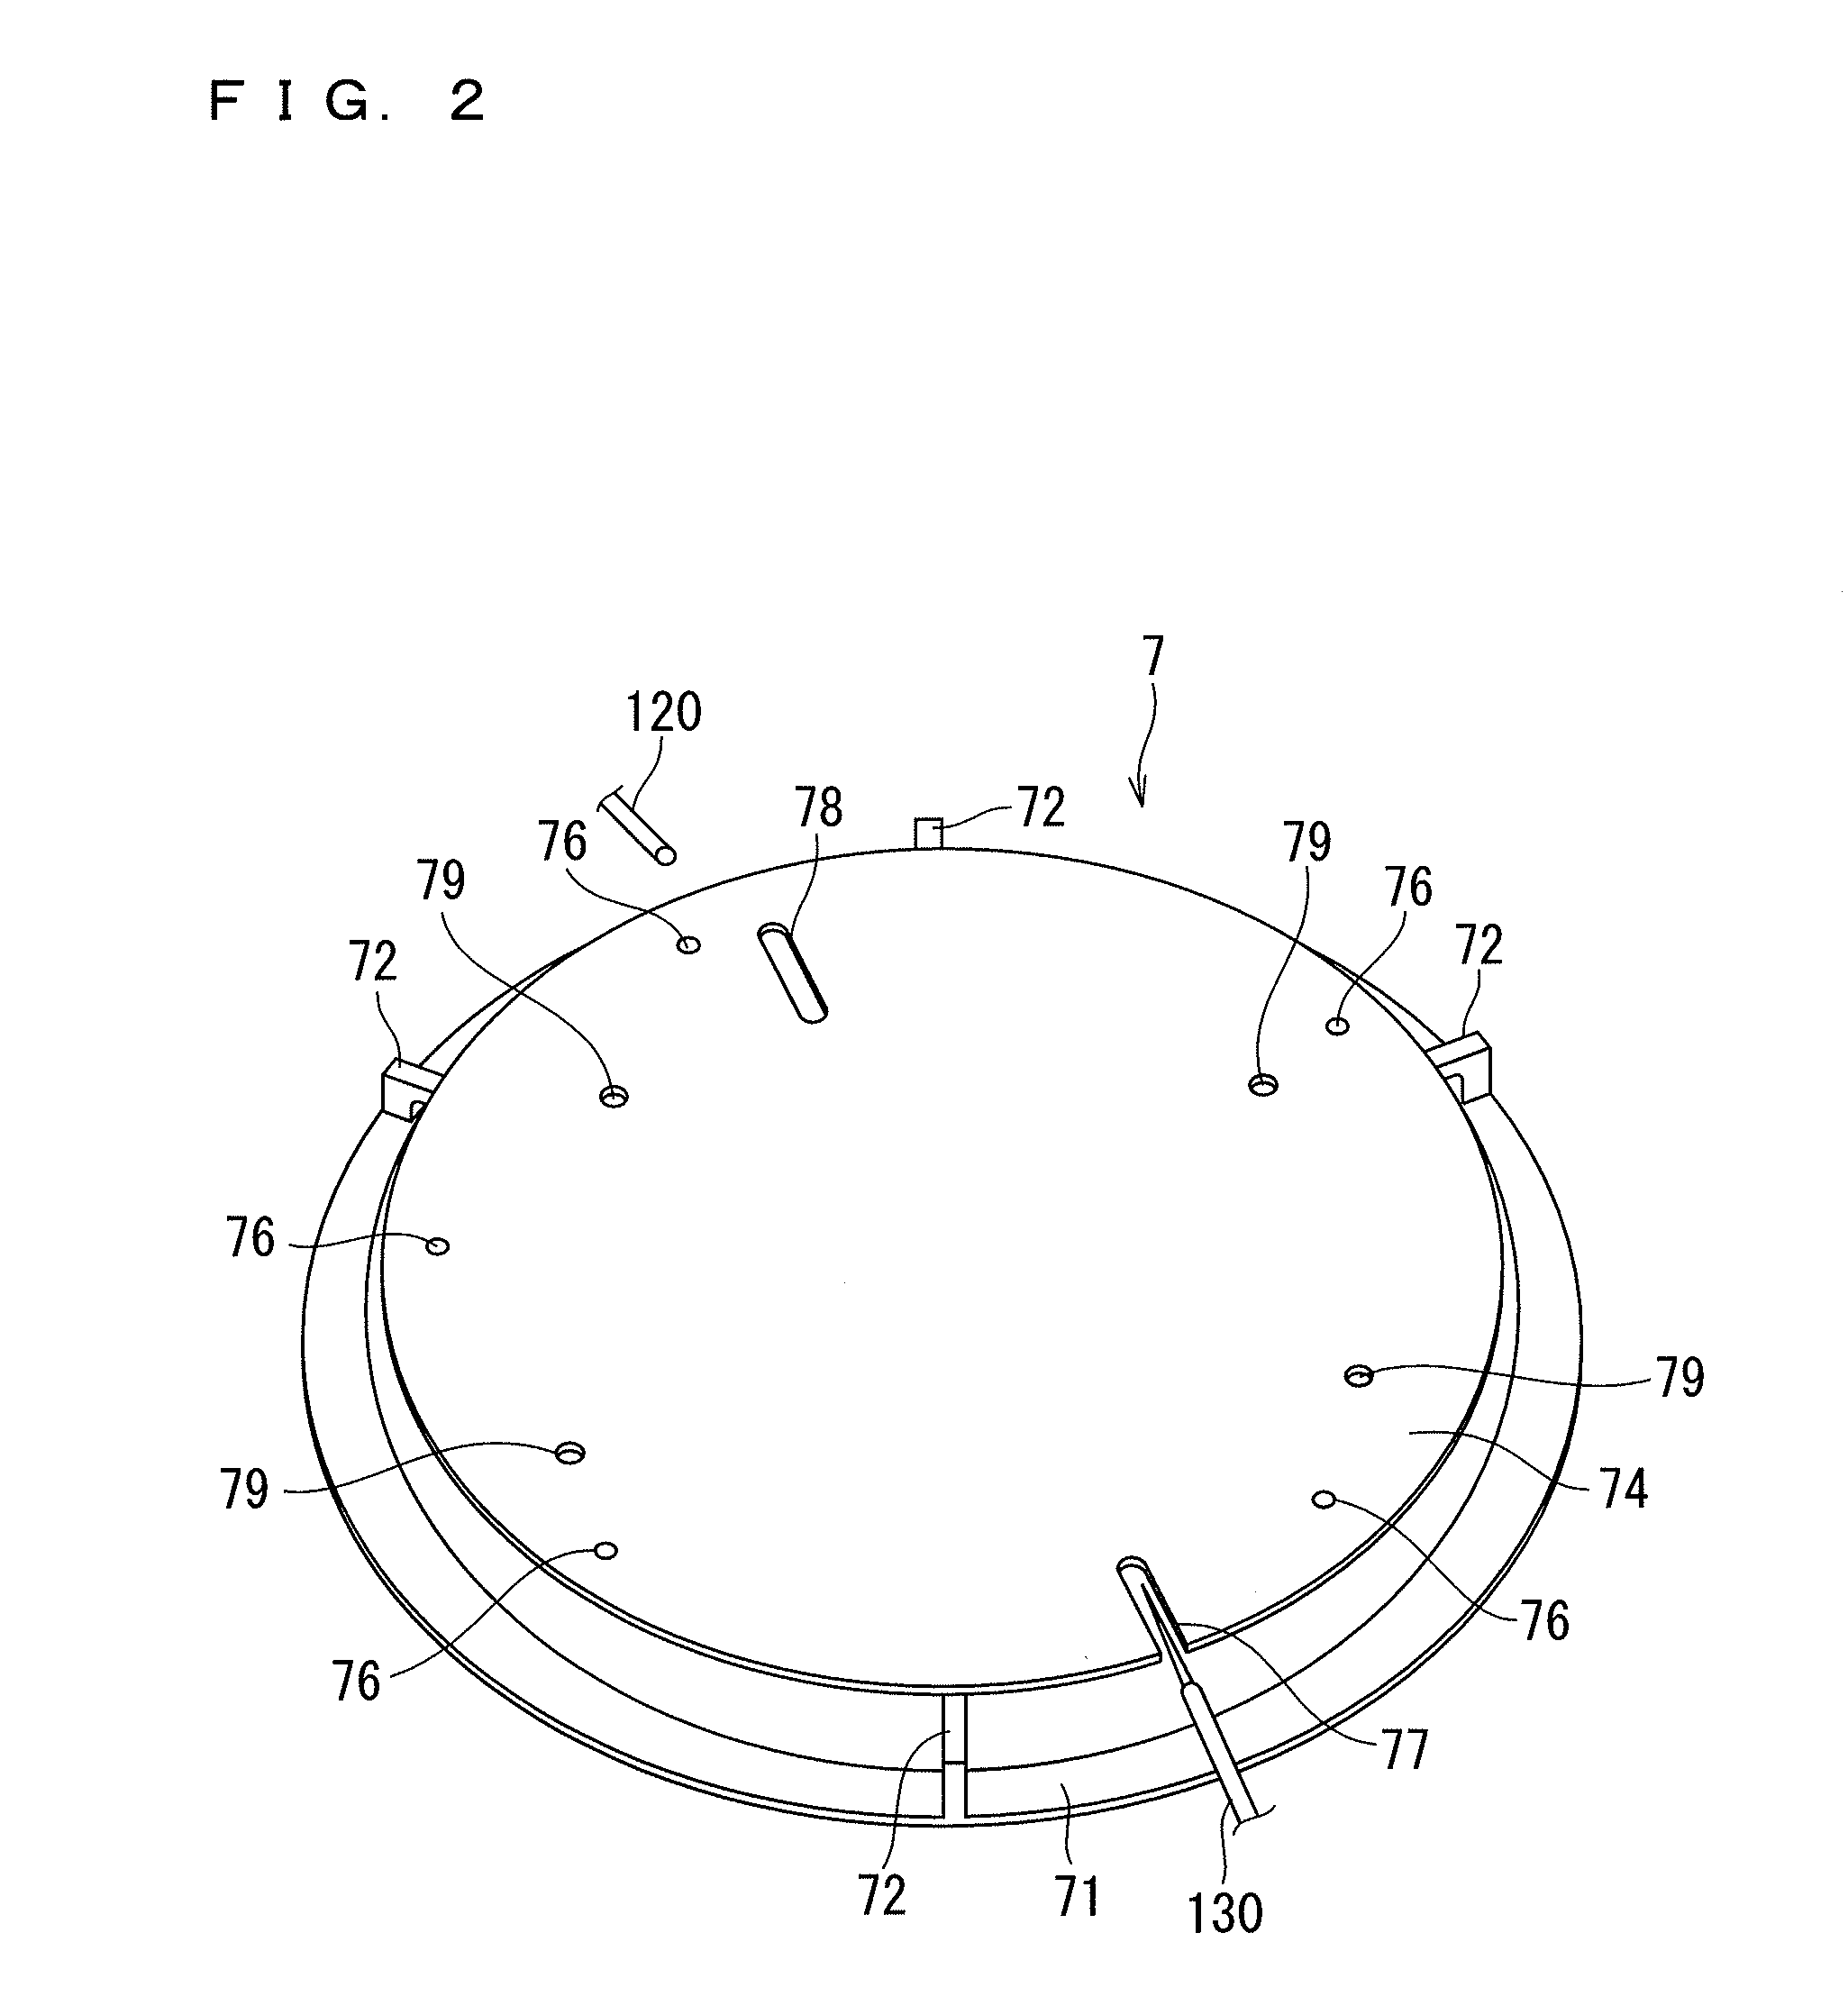 Heat treatment apparatus and heat treatment method for heating substrate by irradiating substrate with flash of light